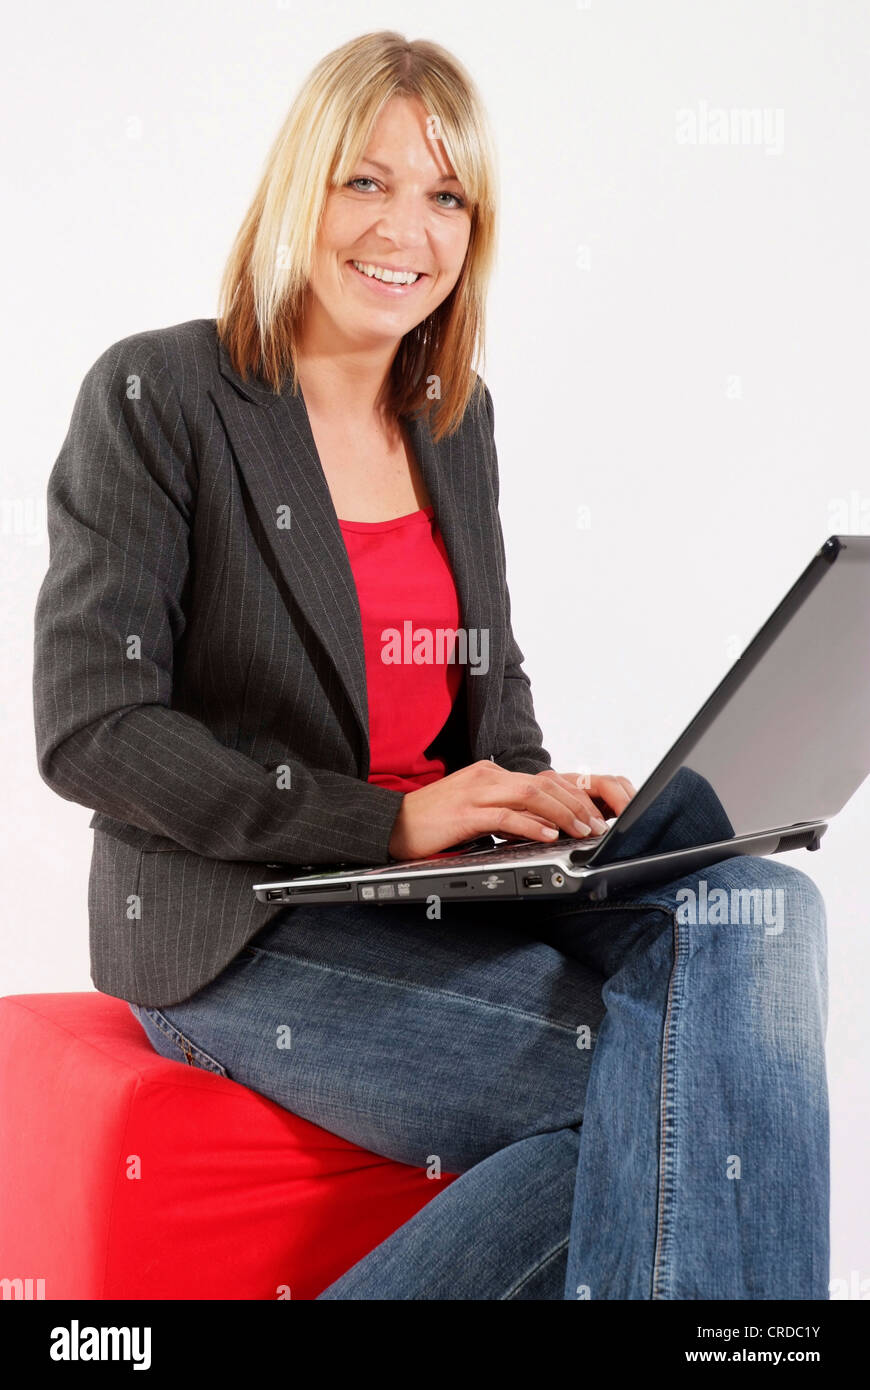 young business woman using laptop Stock Photo